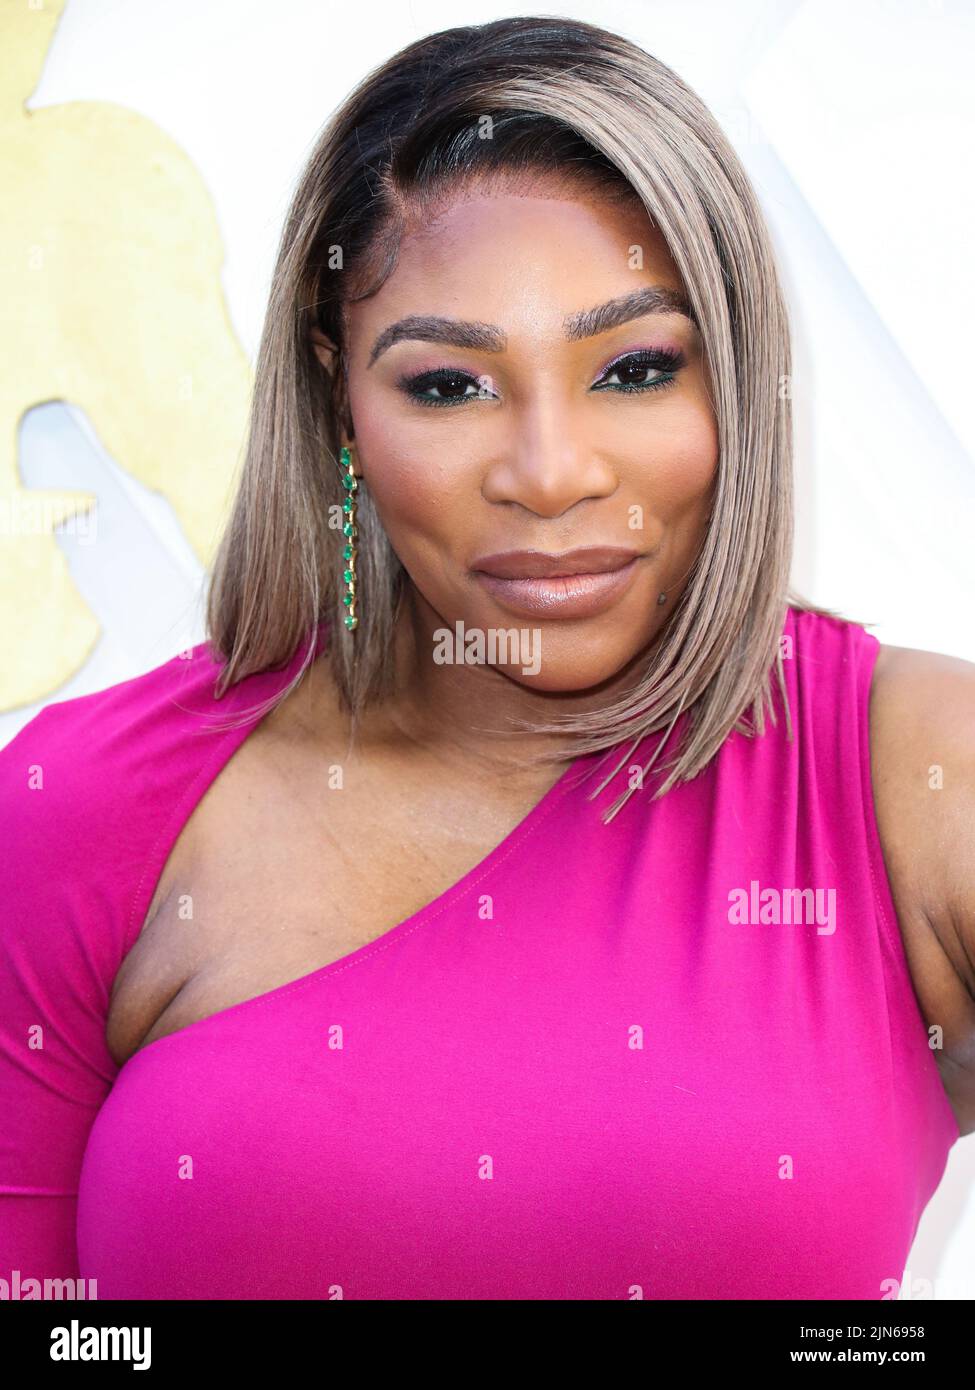 (FILE) Serena Williams Says She Will Retire From Tennis After U.S. Open. BEVERLY HILLS, LOS ANGELES, CALIFORNIA, USA - MARCH 24: American tennis player Serena Williams wearing a dress from her S by Serena collection arrives at the 2022 15th Annual ESSENCE Black Women In Hollywood Awards Luncheon Anniversary Highlighting 'The Black Cinematic Universe' held at the Beverly Wilshire Four Seasons Hotel on March 24, 2022 in Beverly Hills, Los Angeles, California, United States. (Photo by Xavier Collin/Image Press Agency) Stock Photo